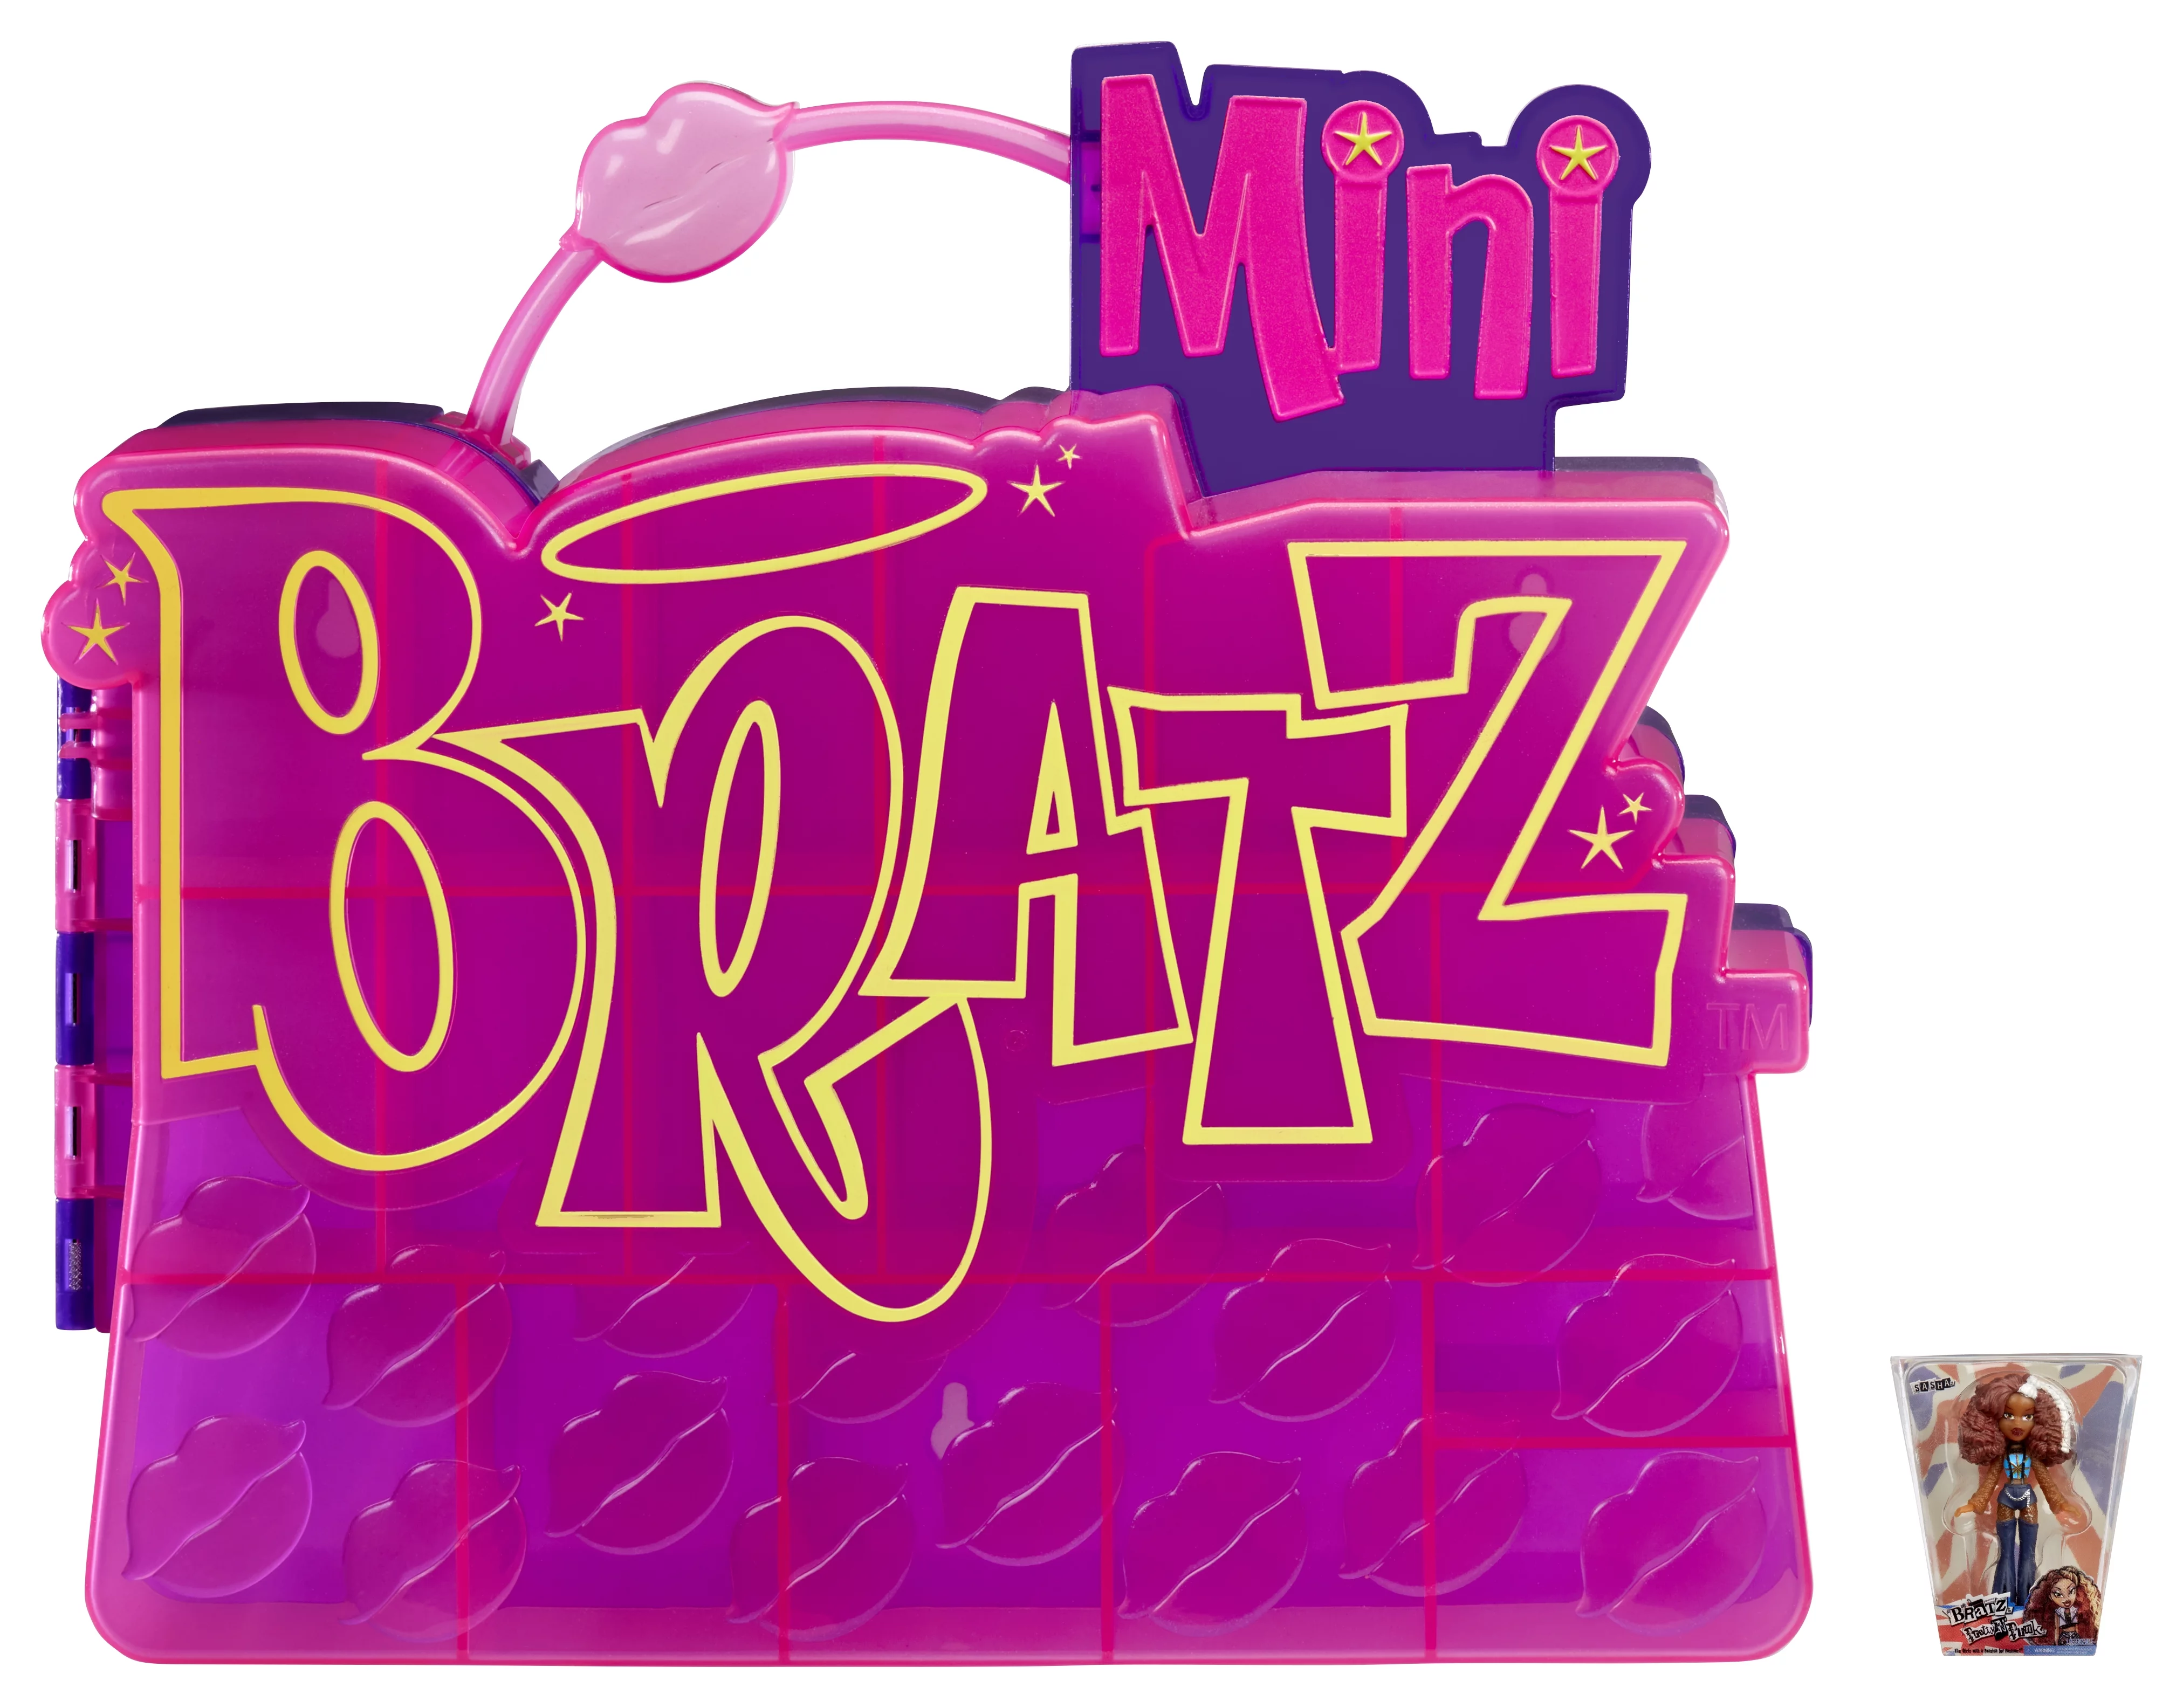 Mini Bratz Collector’s Case with Exclusive Collectible Figure, Holds 60+ Minis, Travel Case and Wall Mountable